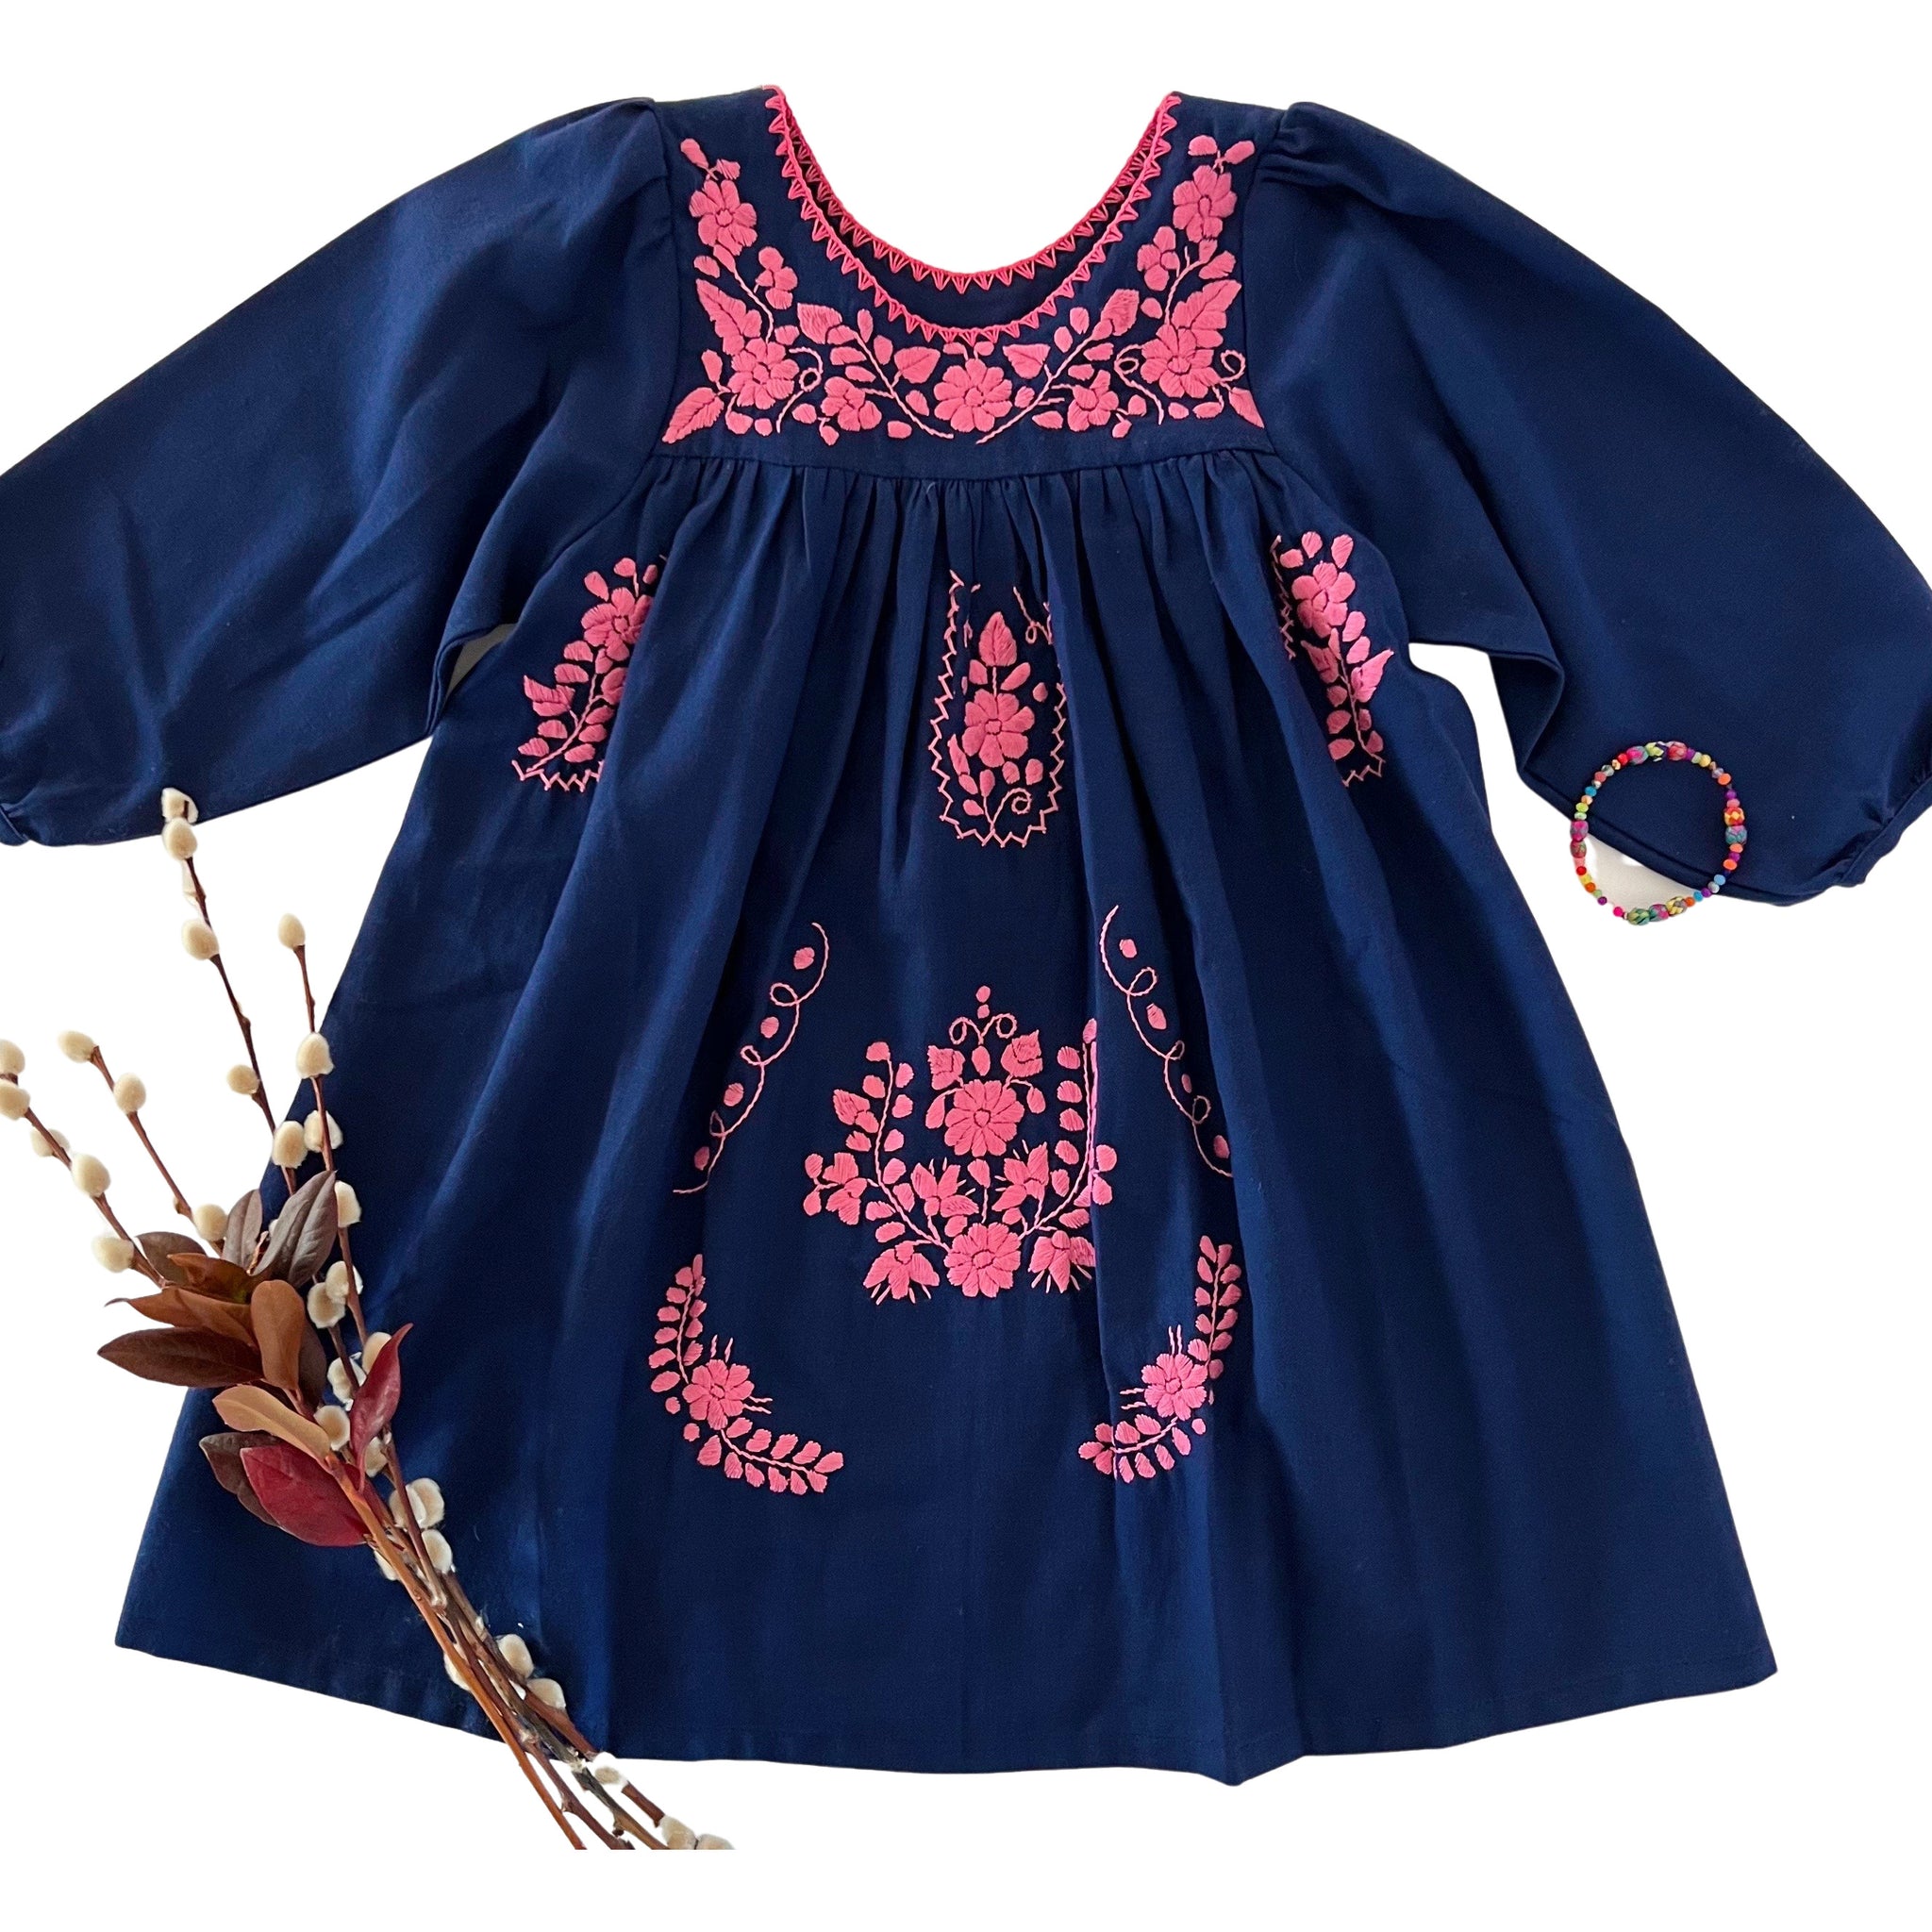 Girls Long Sleeve Autumn Dress with Pink Embroidery